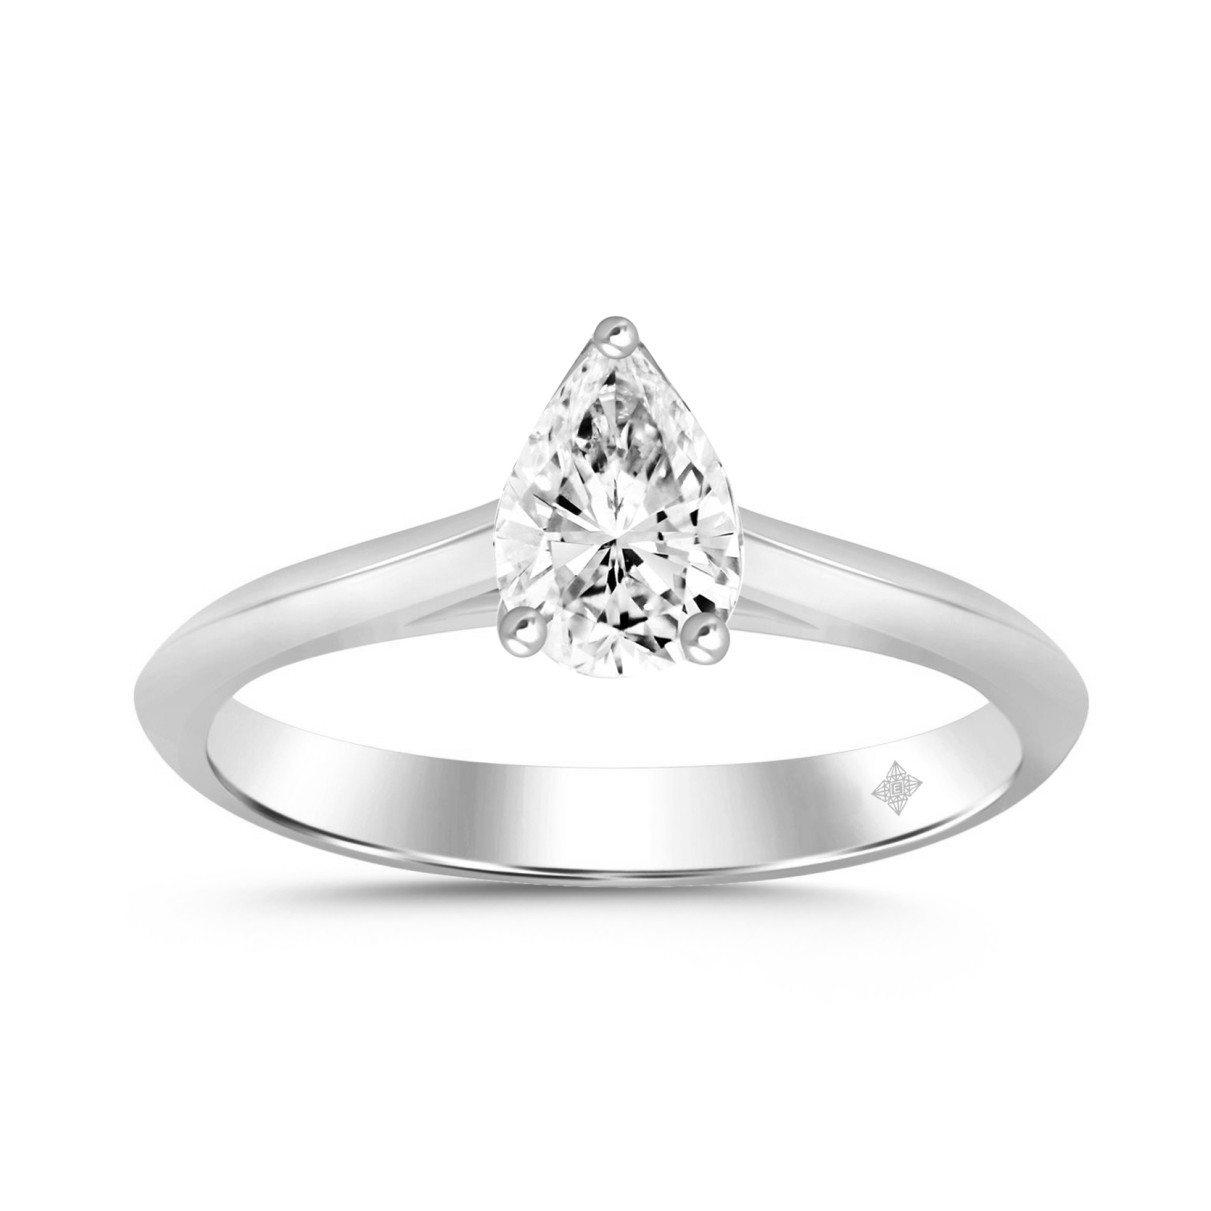 LADIES SOLITAIRE RING 4CT PEAR DIAMOND 14K WHITE GOLD 